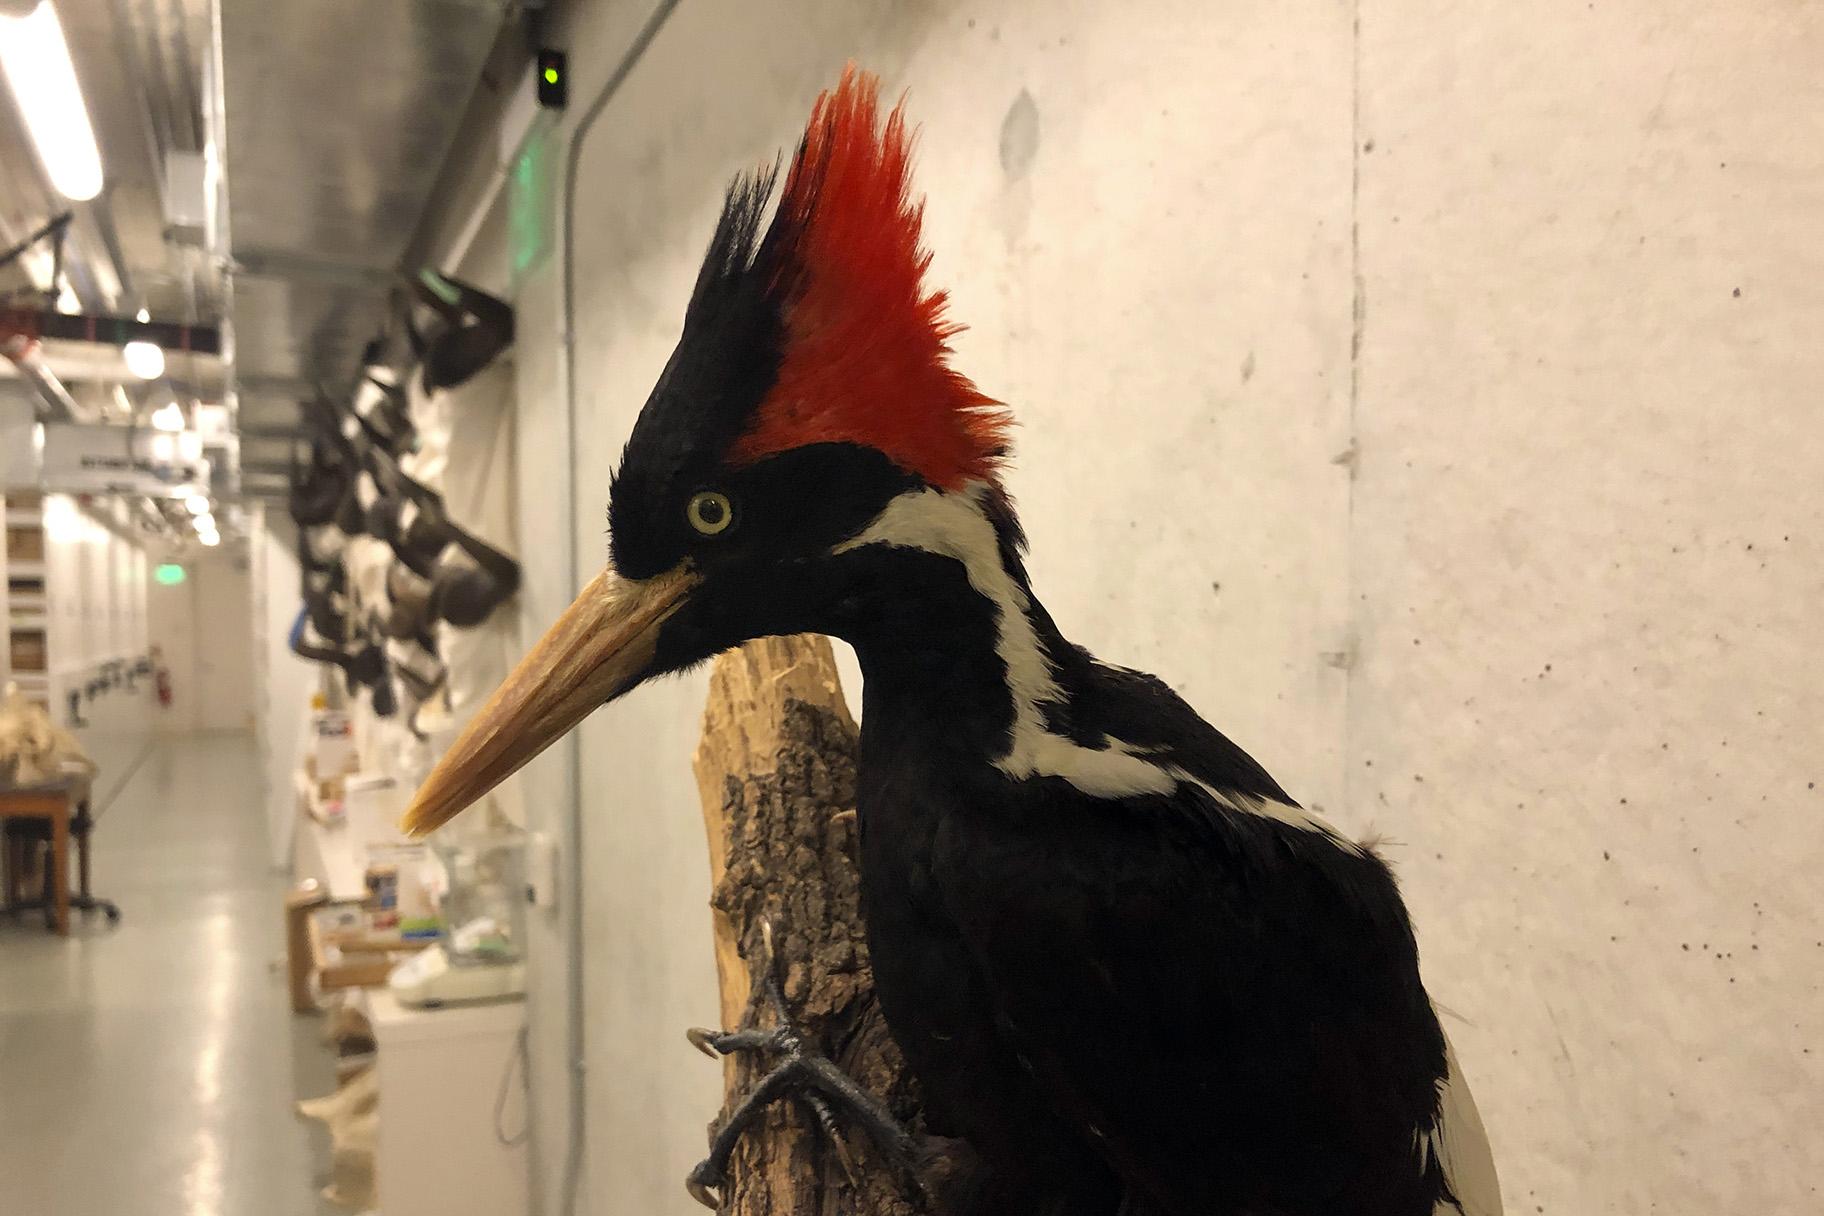 An ivory-billed woodpecker specimen is on a display at the California Academy of Sciences in San Francisco, Friday, Sept. 24, 2021. (AP Photo / Haven Daley)